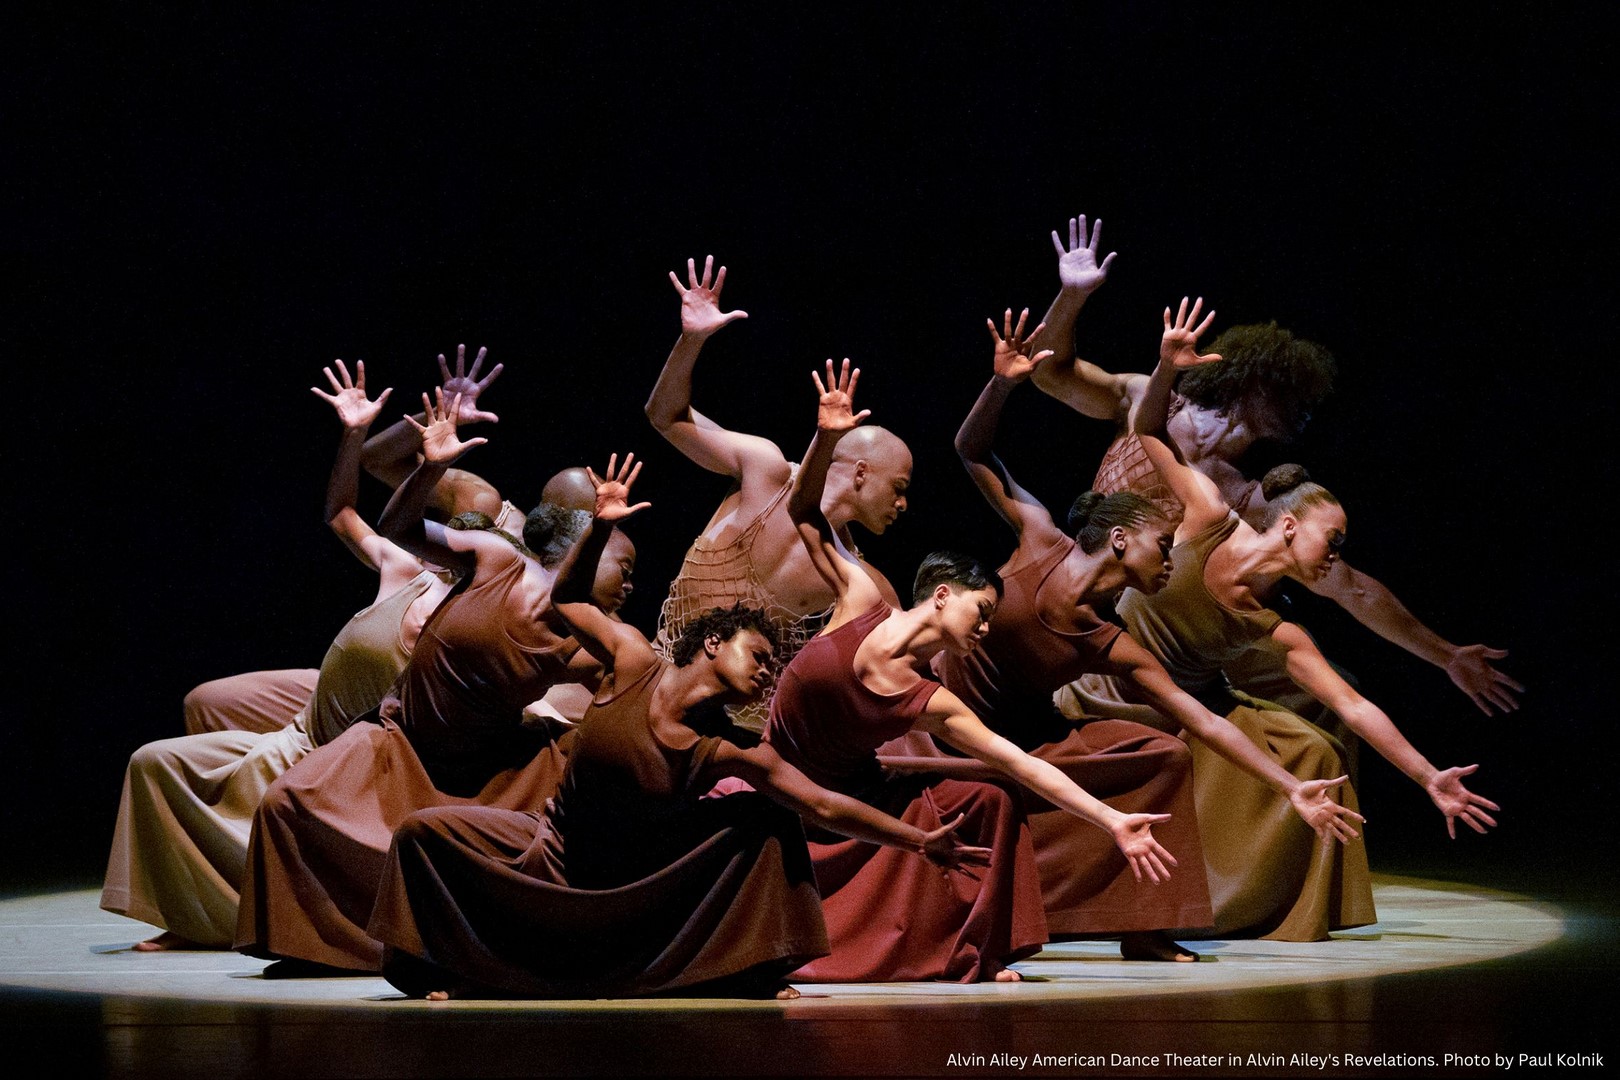 Anmeldelse: Alvin Ailey American Dance Theater (Program A), Tivoli (Alvin Ailey American Dance Theater)